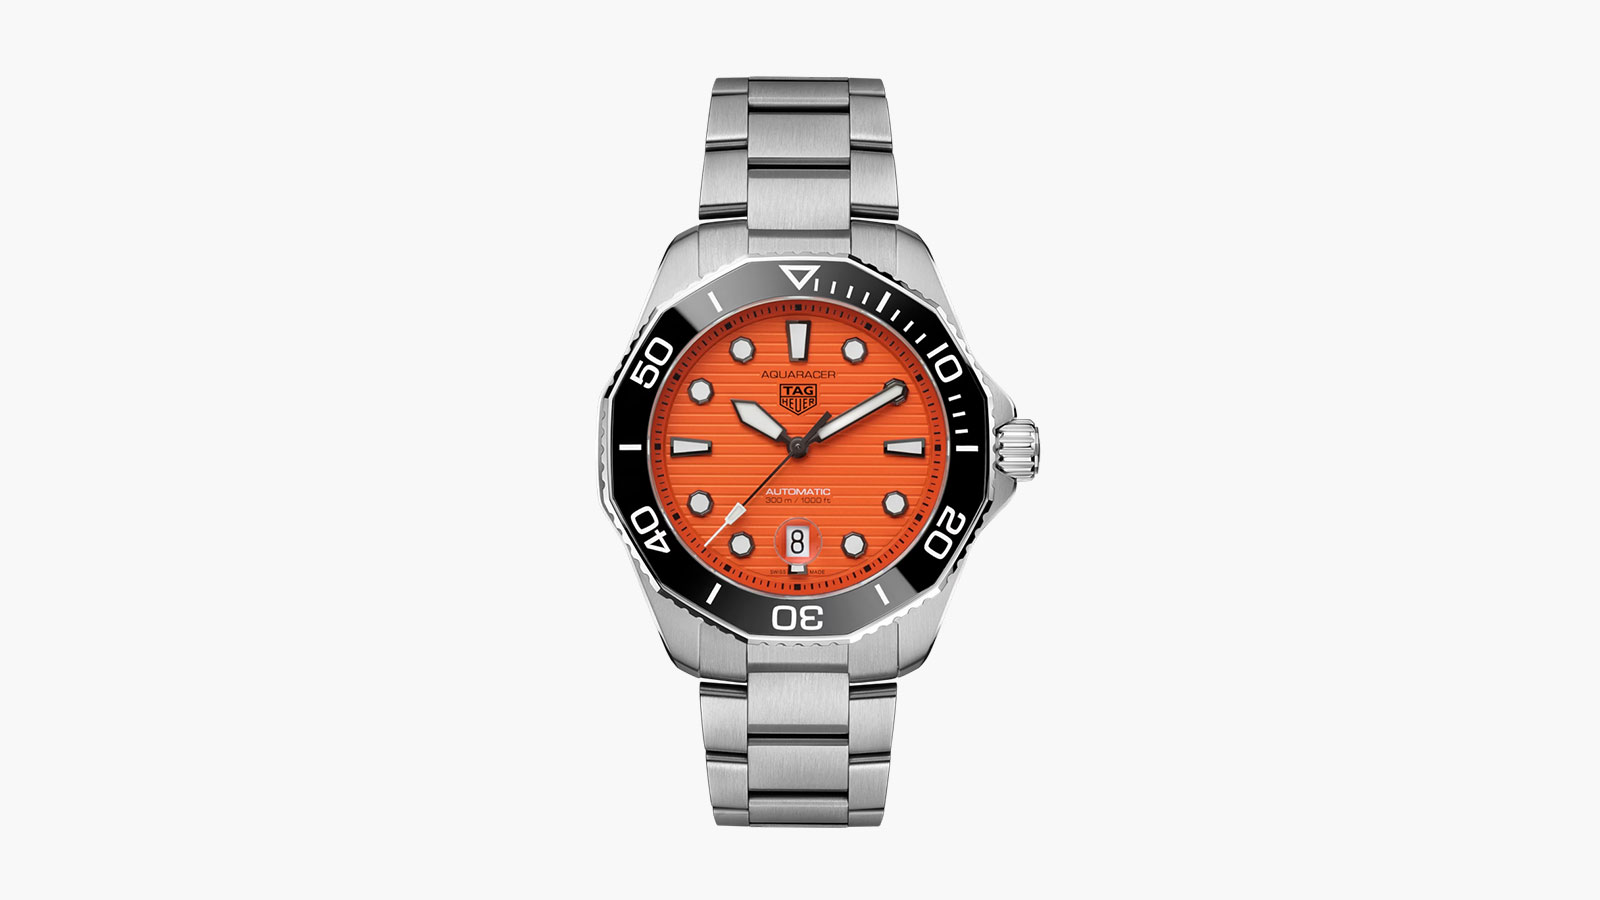 A silver luxury watch with an orange face